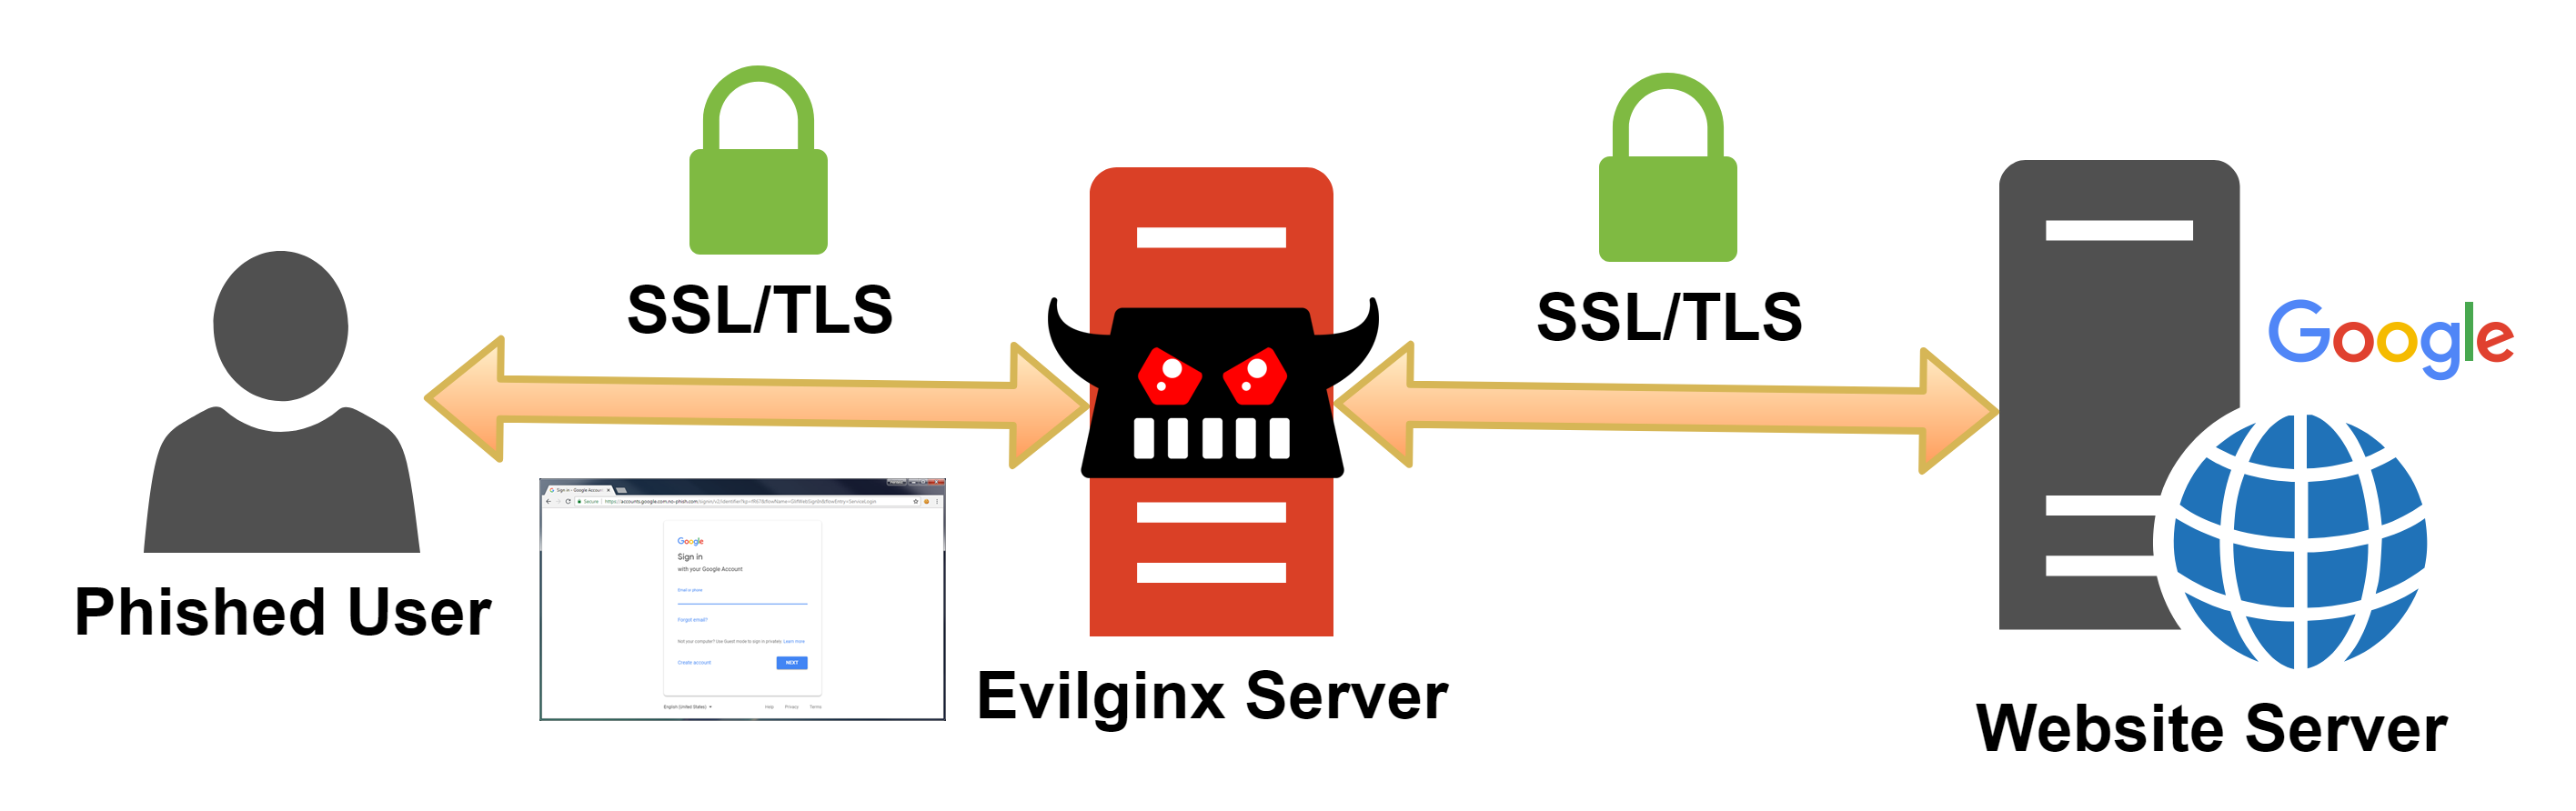 Diagram of Evilginx in the middle proxying the connection